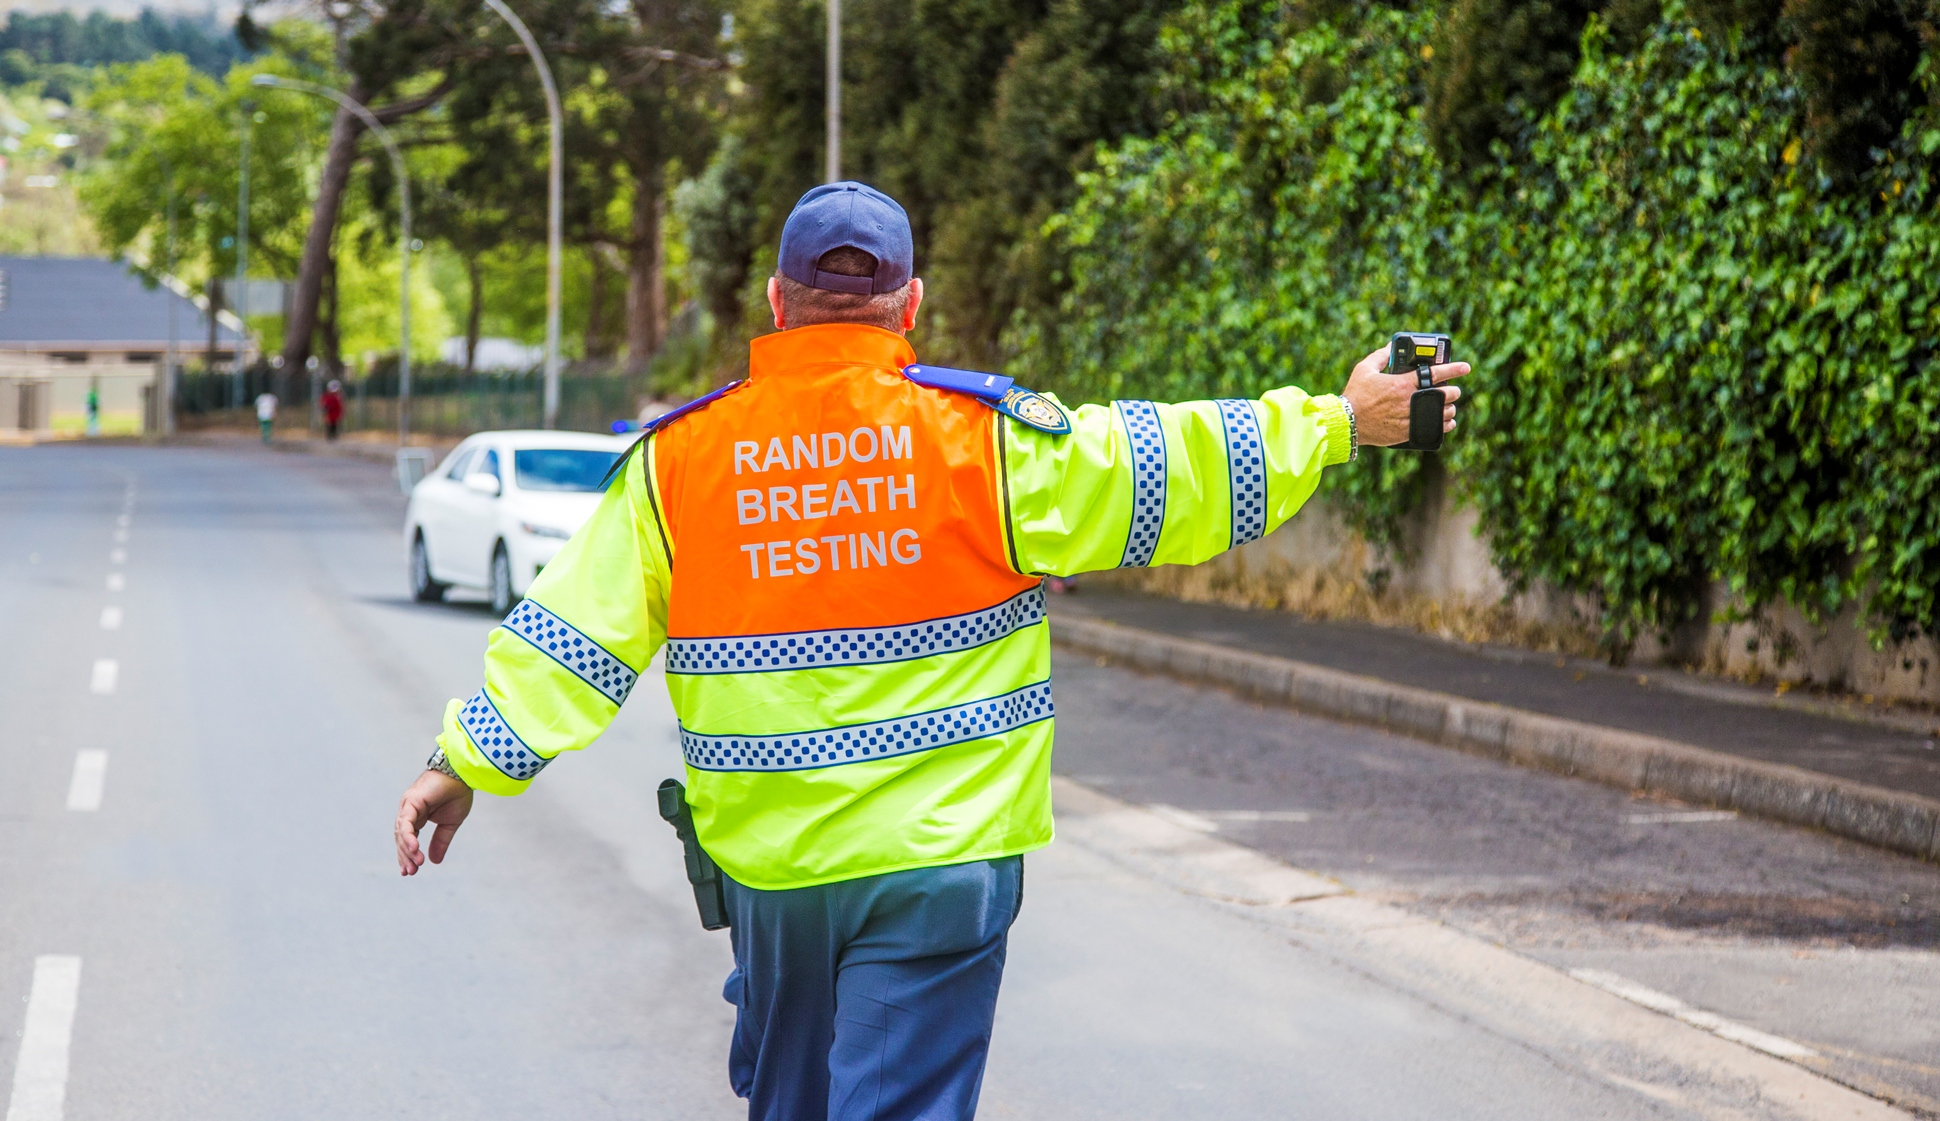 Revolutionising road safety: Combating drinking and driving and police corruption in South Africa with cloud technology